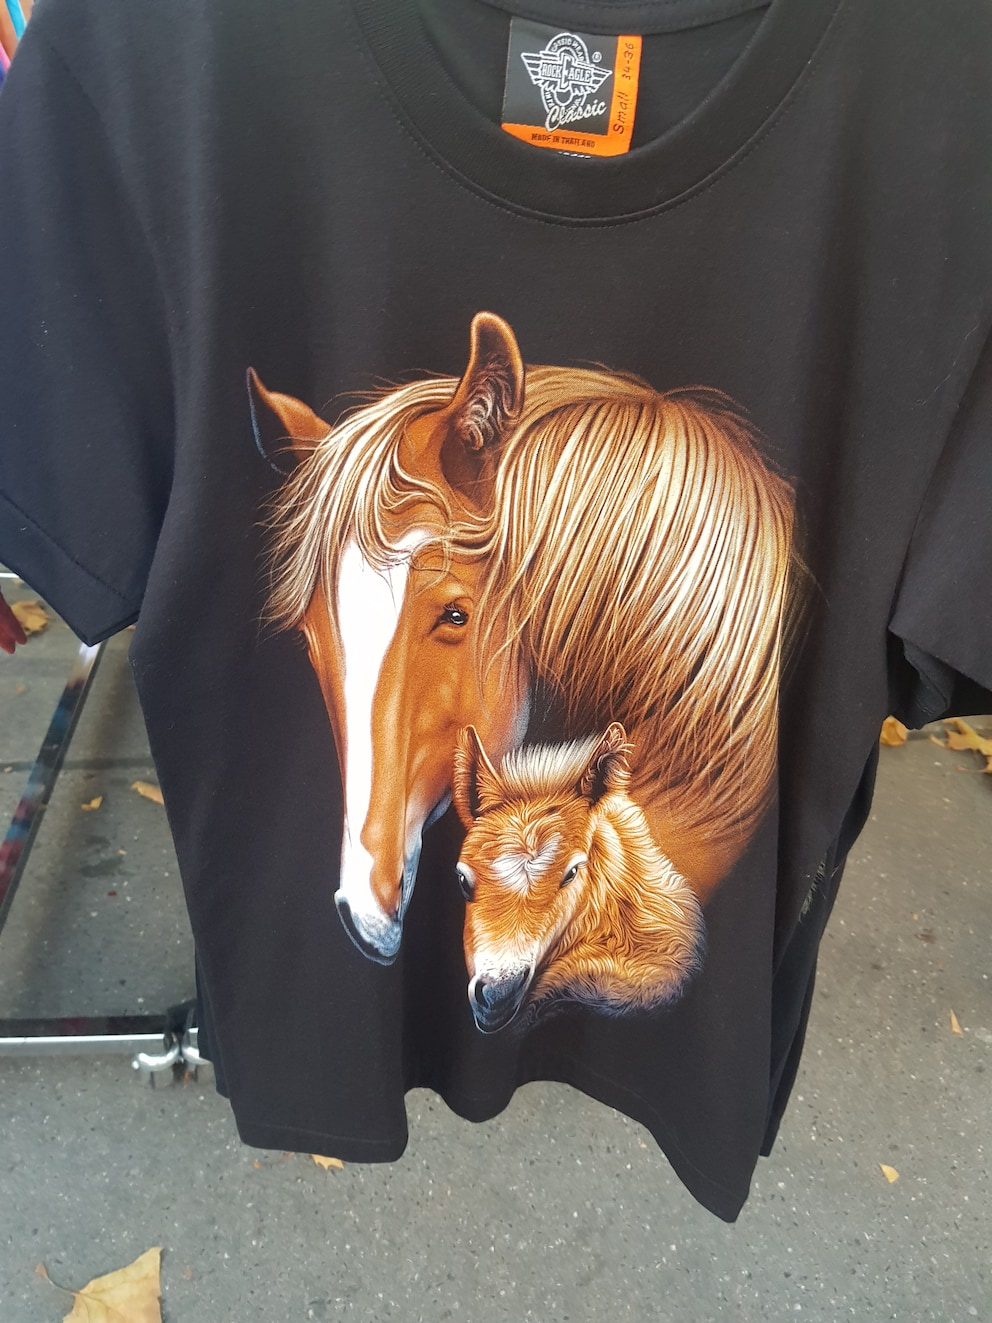 Or on this kind of laid-back T-shirt with a horse logo.